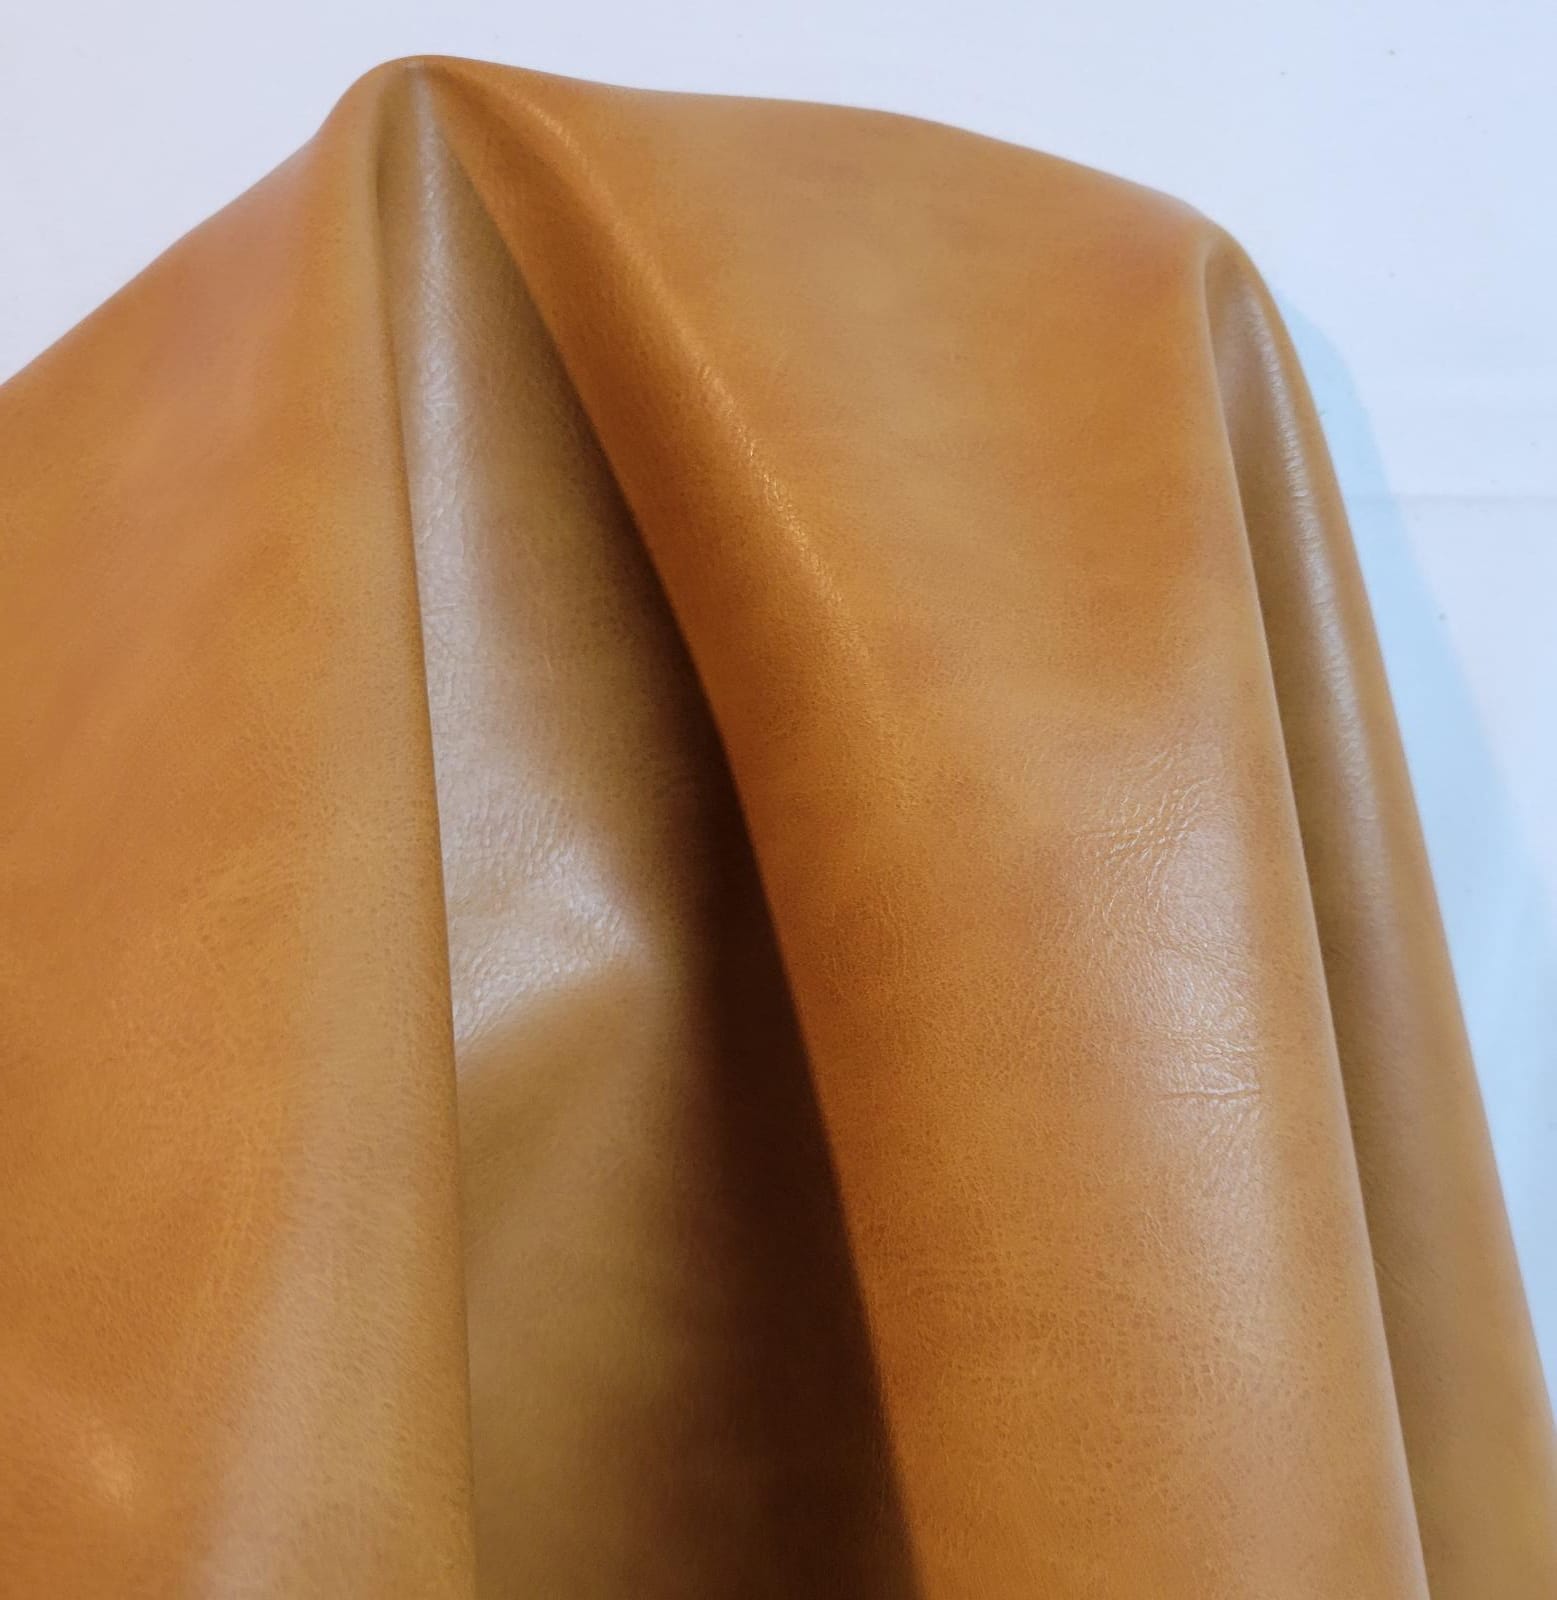  Faux vegan leather by the yard sheets distressed leather fabric for upholstery 30,000 Double Rubs vinyl sheets nappa leather crafts bookbinding books furniture fabrics uphilstery fuax material pu pleather faiux learher cruelty free nappa seat tan